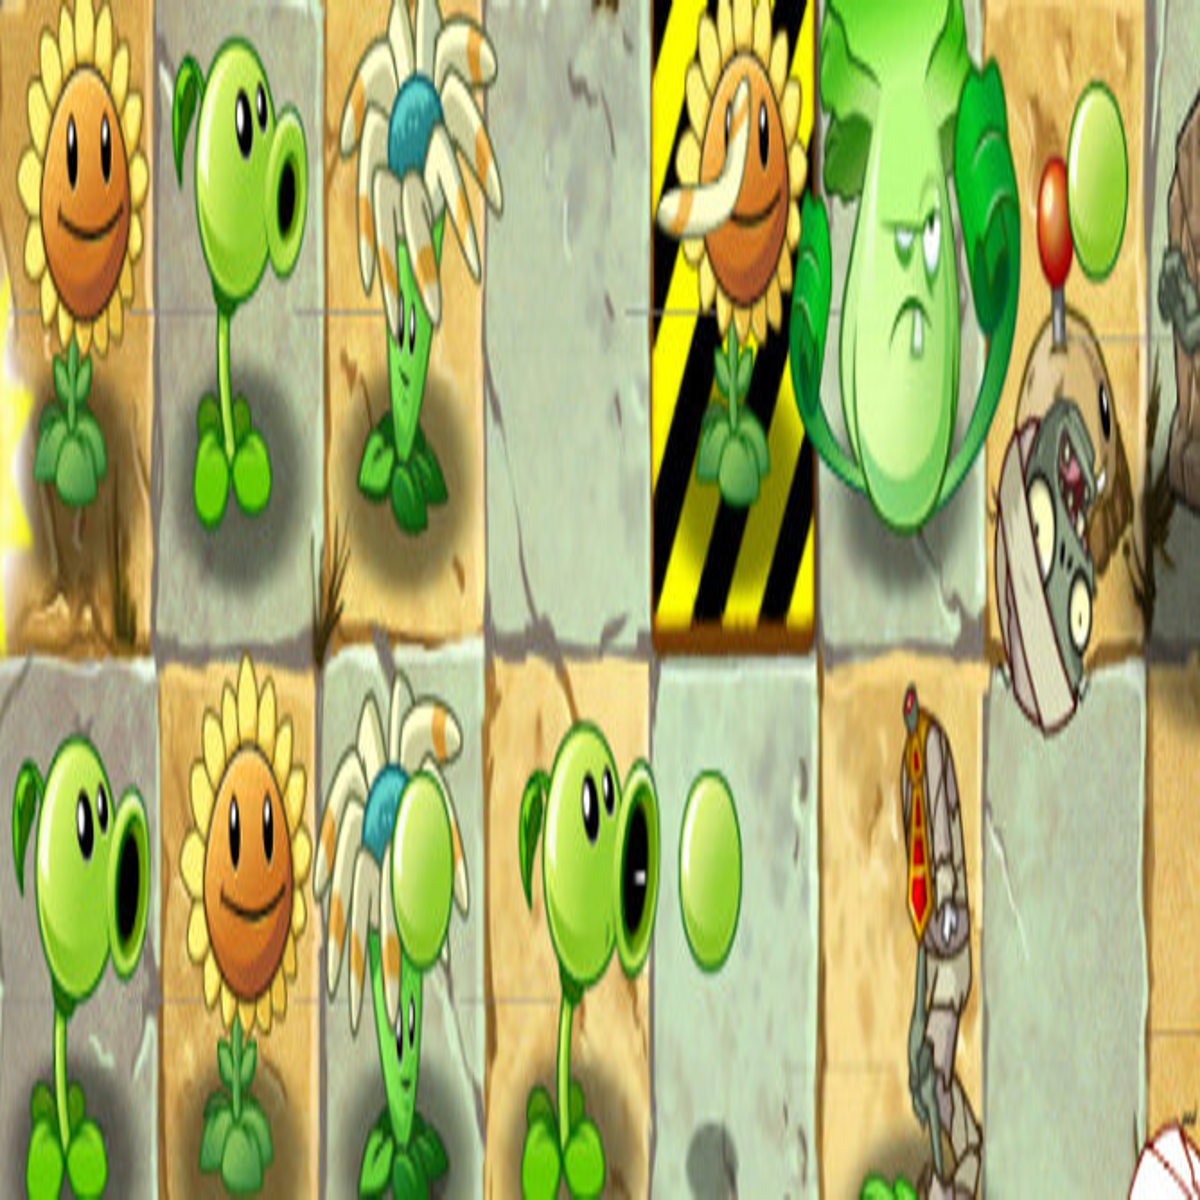 Plants vs. Zombies™ 2 on the App Store